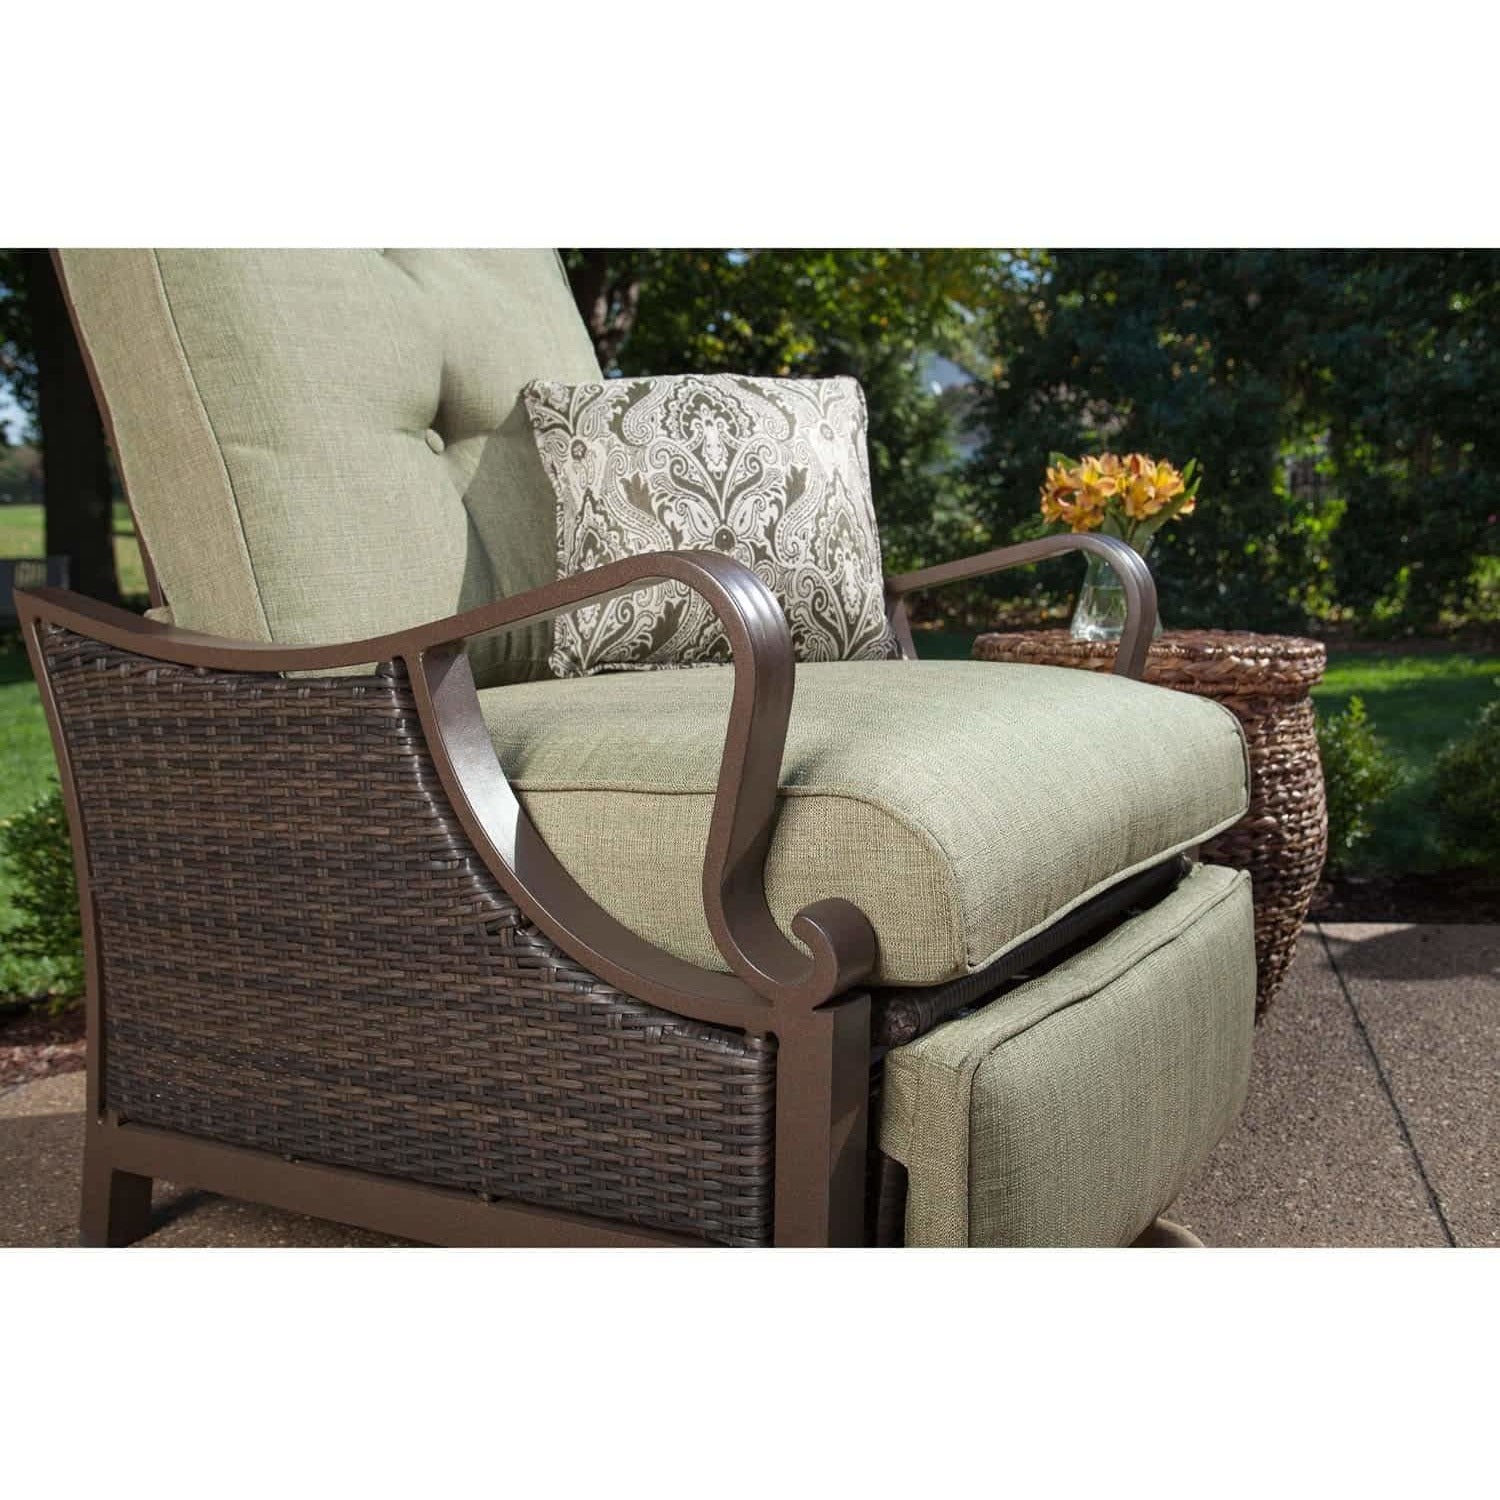 Hammond Casitas Luxury Reclining Patio Chair With Pillow Accessory - M&K Grills